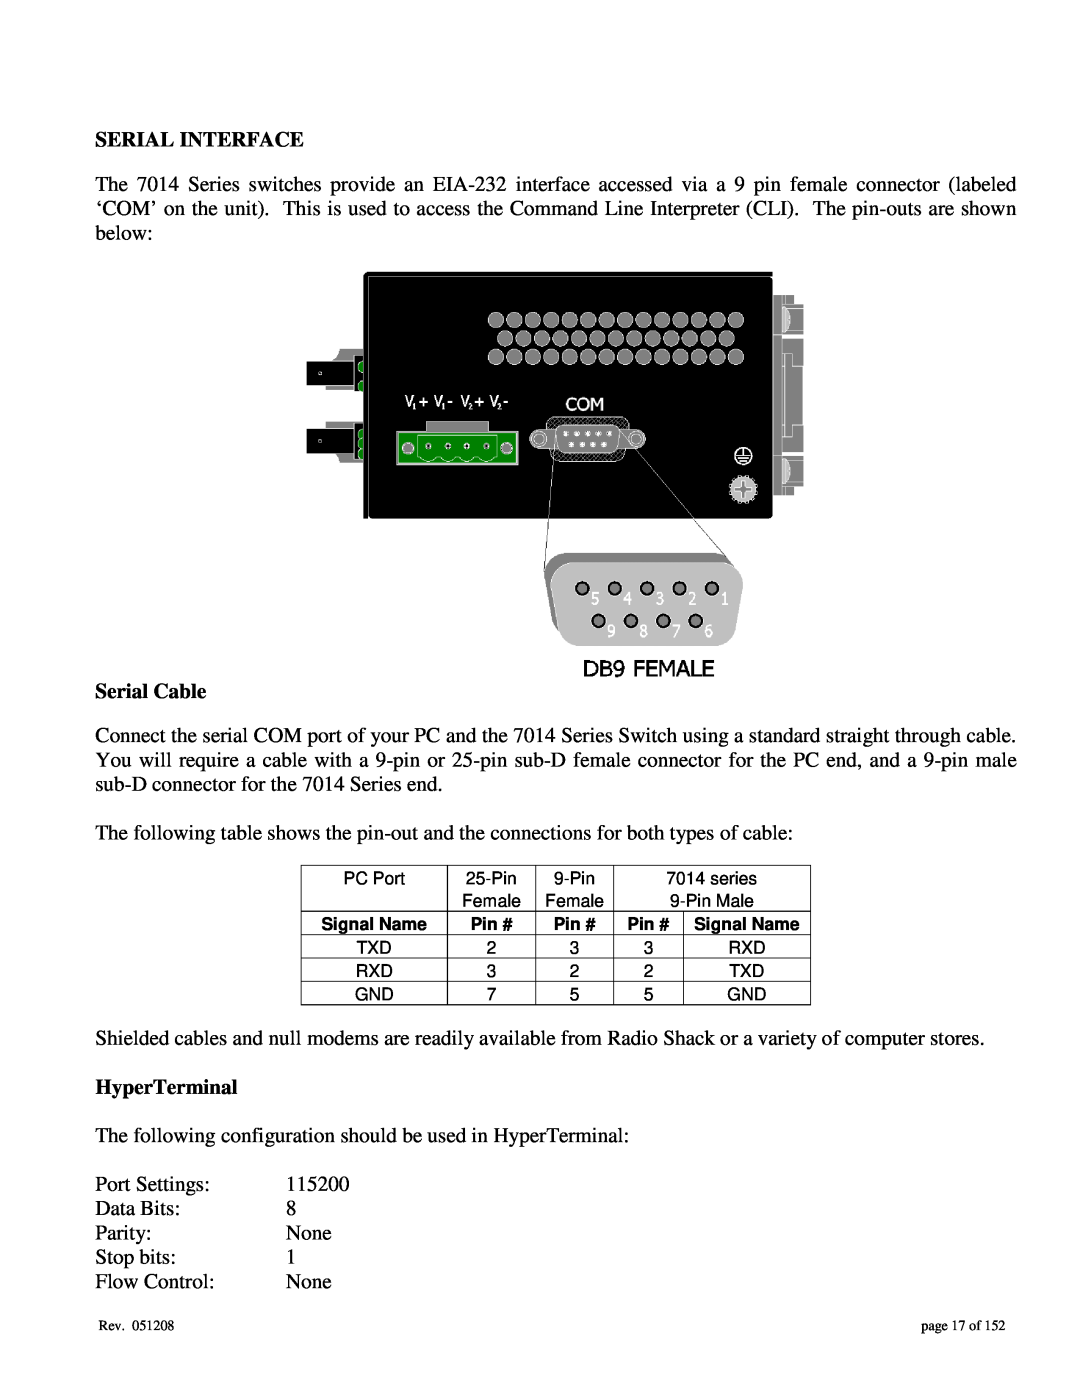 Gigabyte 7014 user manual Serial Interface, Serial Cable, HyperTerminal, page 17 of 